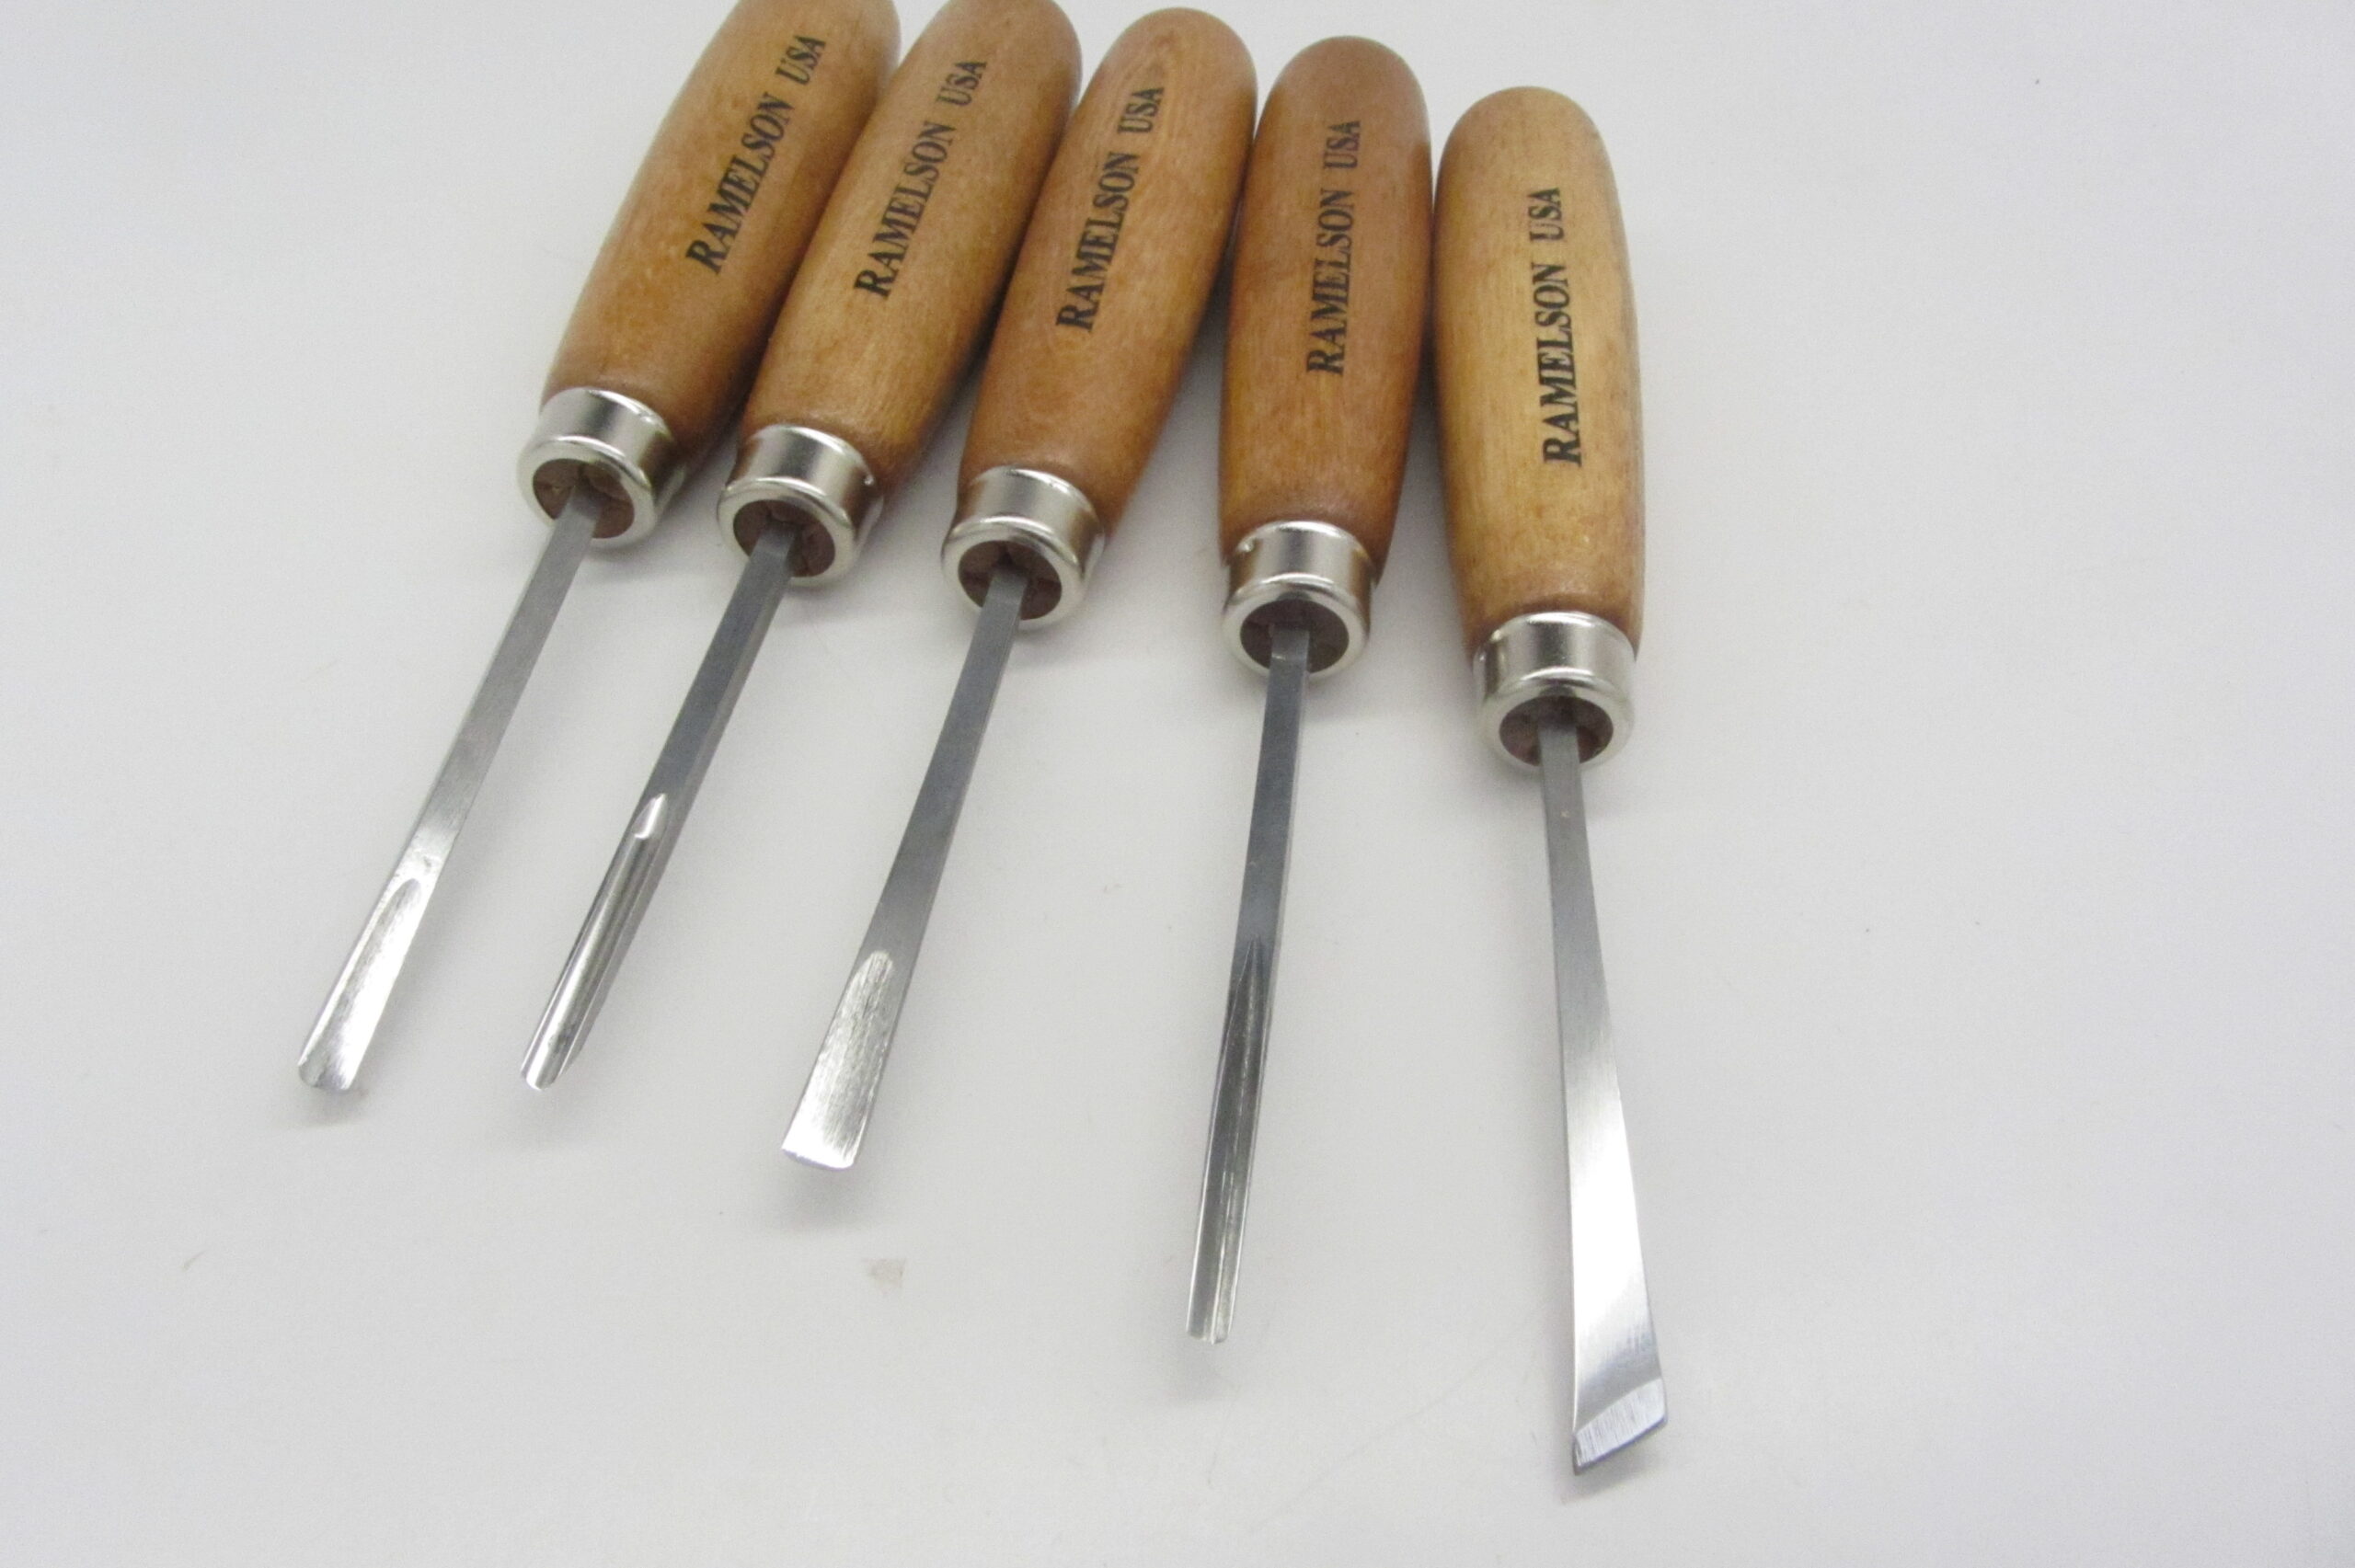 Wood Carving Tools - How To Carve Wood